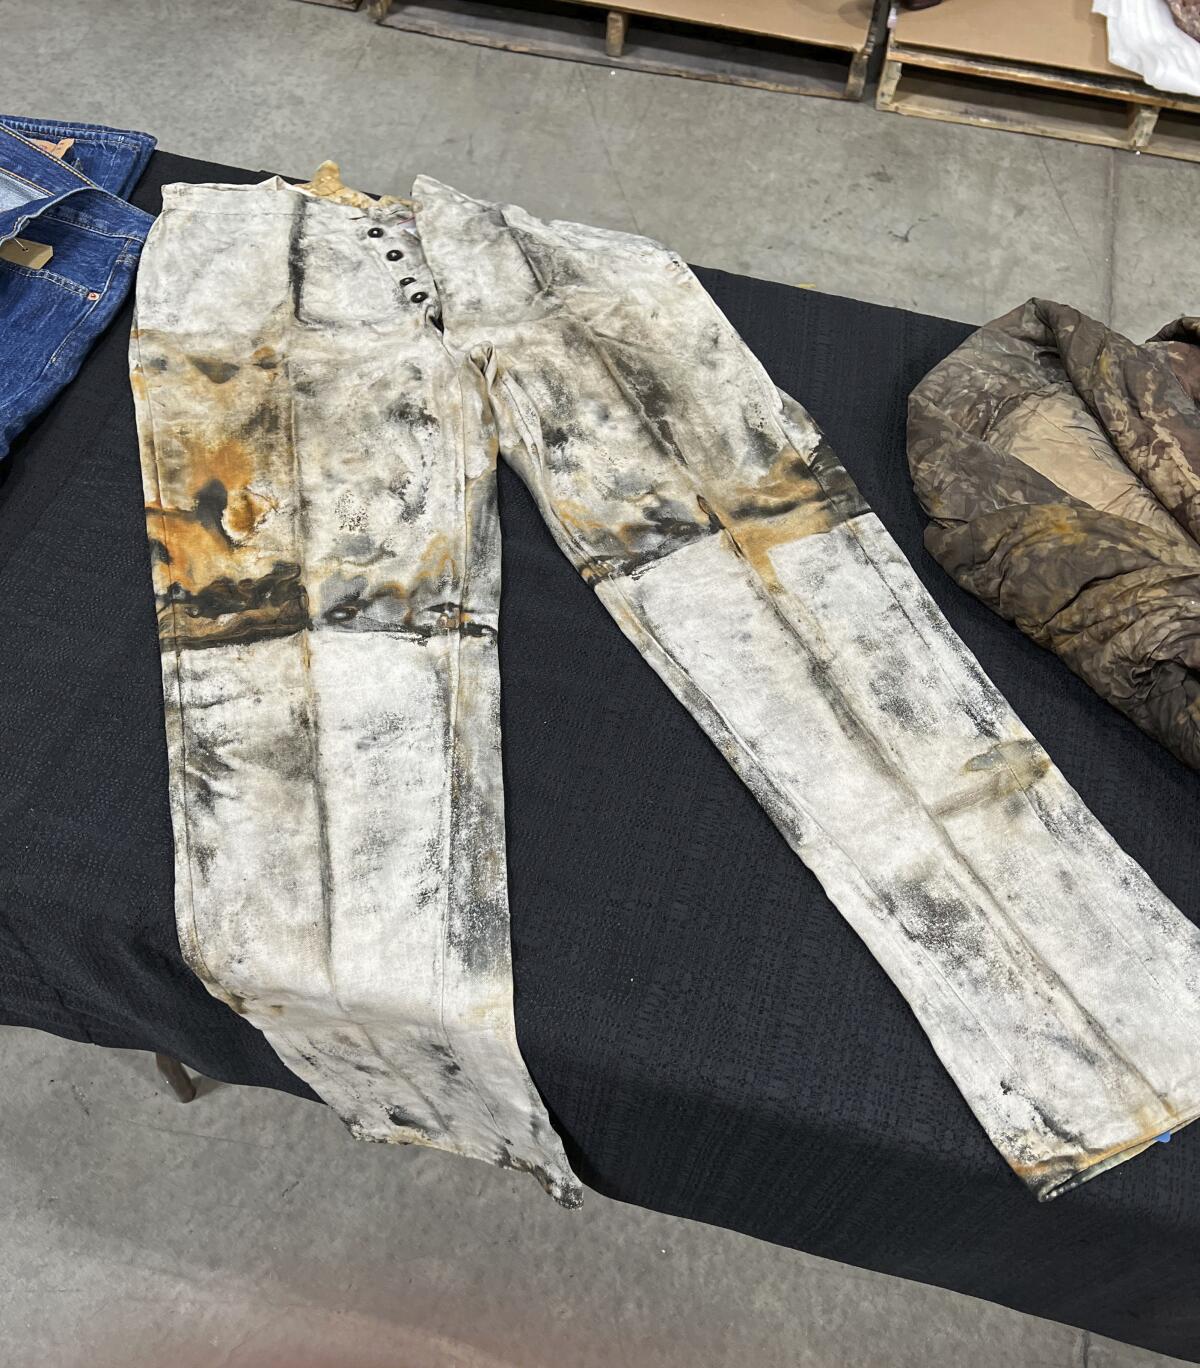 A pair of old, distressed work pants salvaged from a shipwreck lie on a table